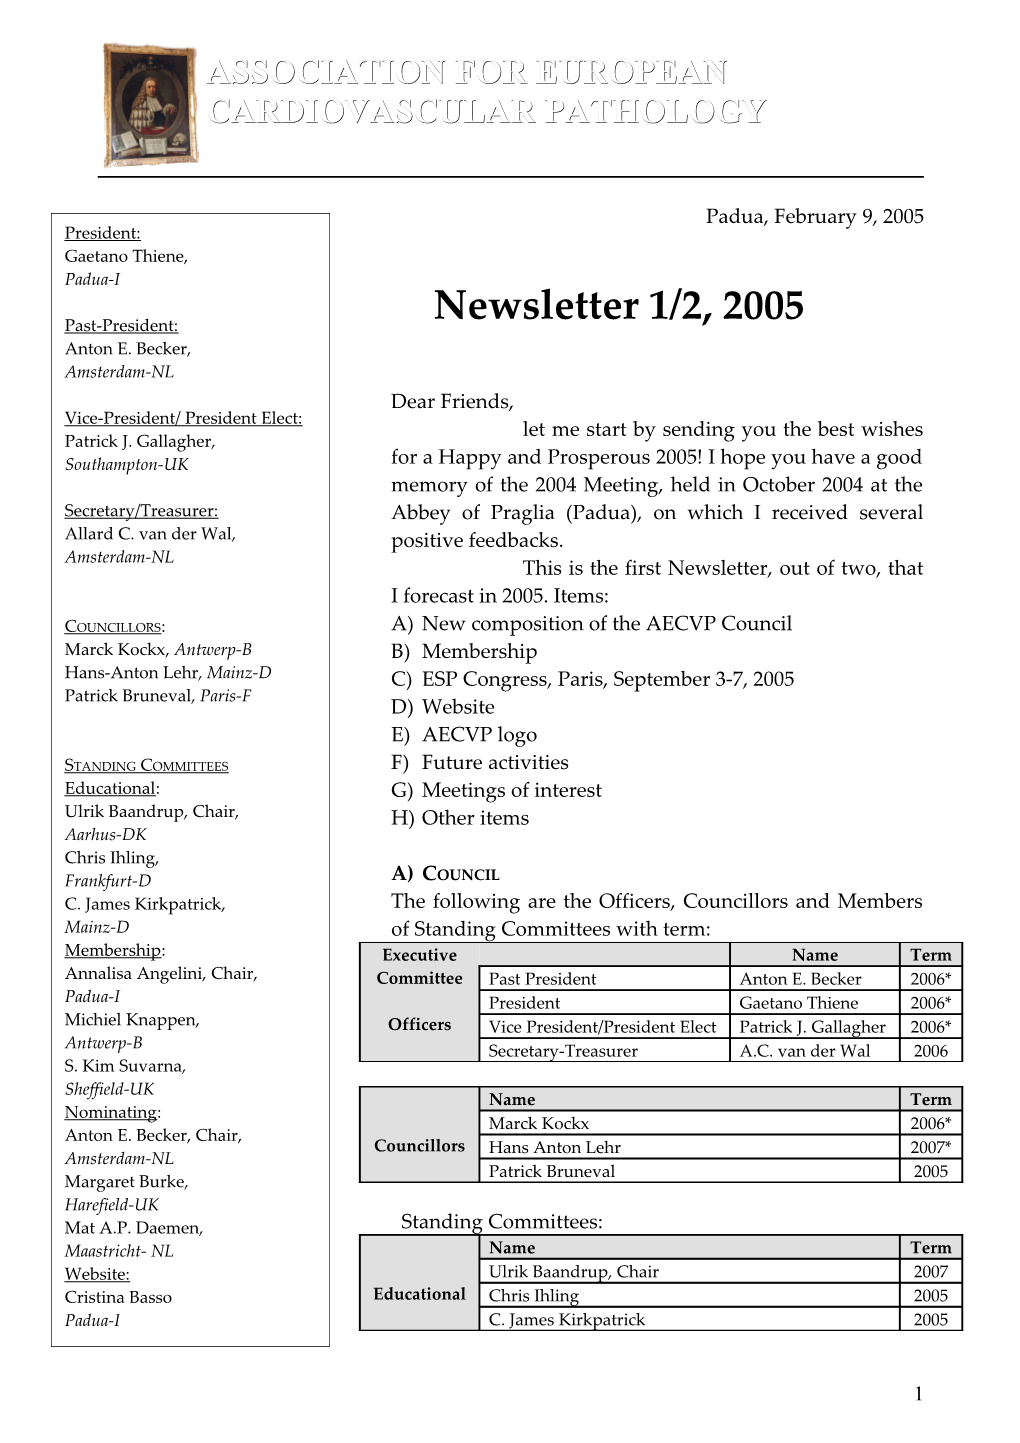 This Is the First Newsletter, out of Two, That I Forecast in 2005. Items